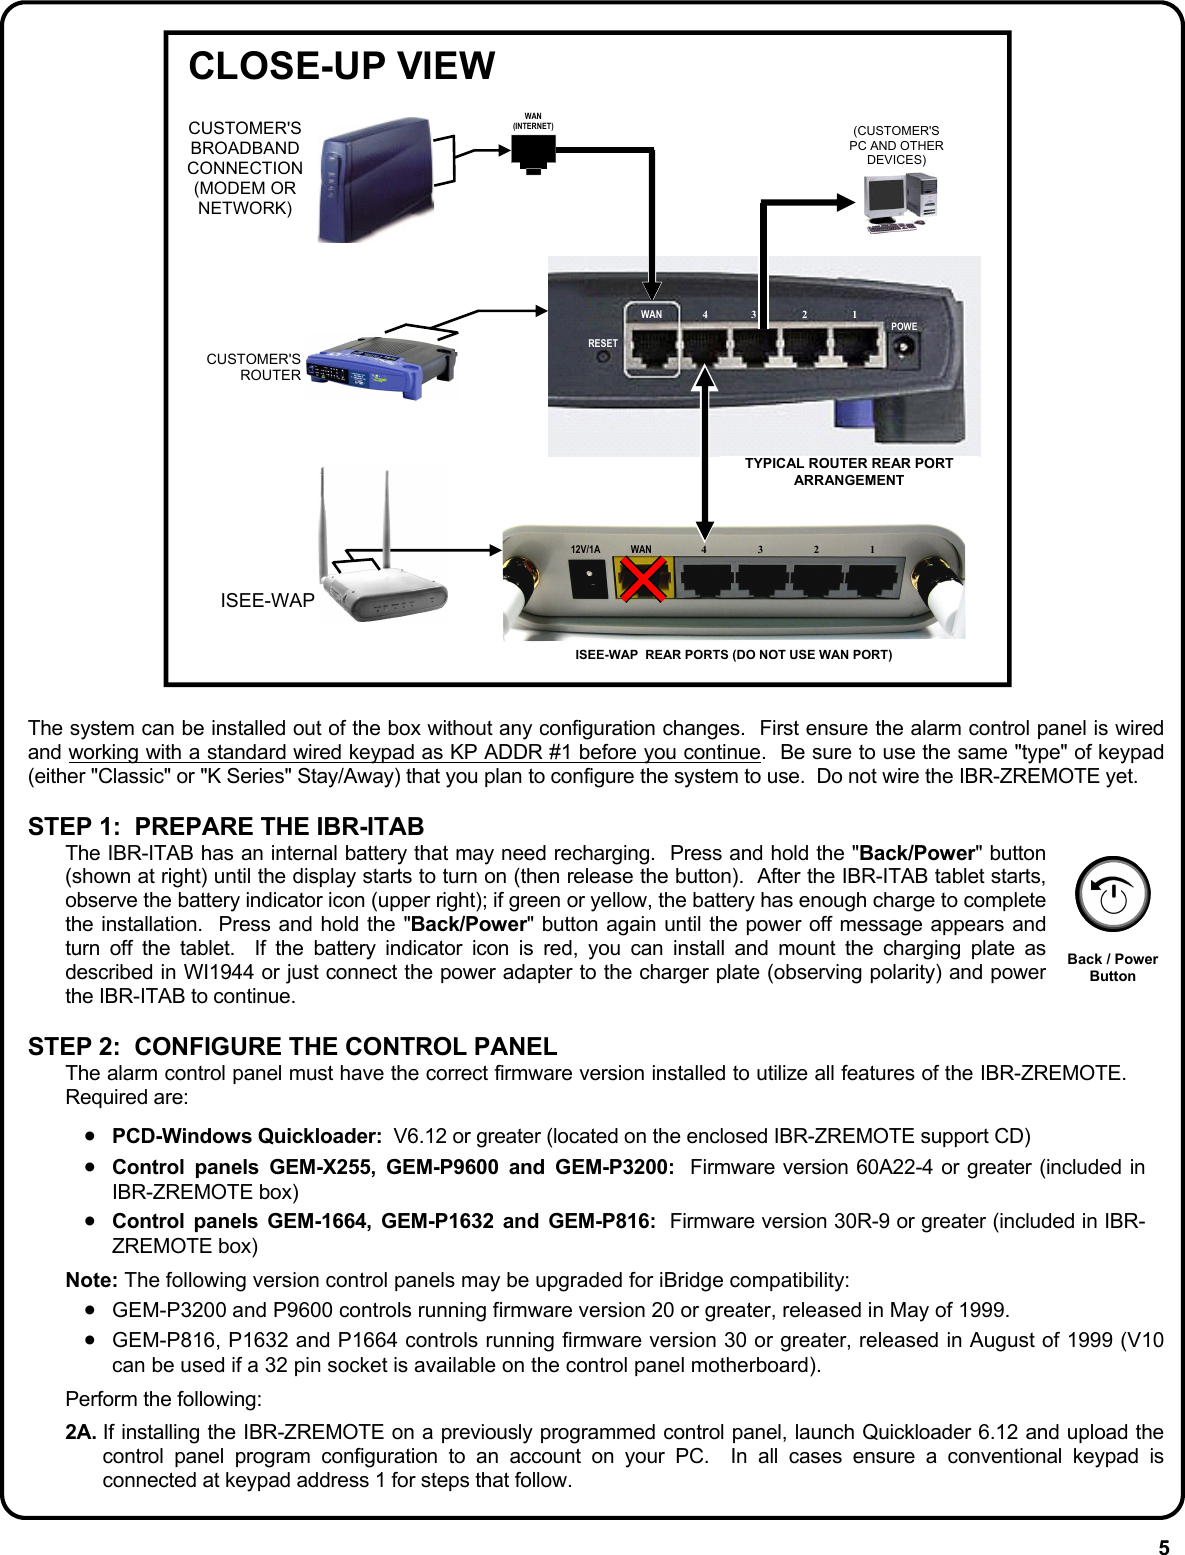 5 RESET WAN  4 3  2  1 POWE WAN  4 3 2 1 12V/1A CUSTOMER&apos;S BROADBAND CONNECTION (MODEM OR NETWORK) WAN (INTERNET)  (CUSTOMER&apos;S PC AND OTHER DEVICES) CUSTOMER&apos;S ROUTER ISEE-WAP ISEE-WAP  REAR PORTS (DO NOT USE WAN PORT) TYPICAL ROUTER REAR PORT ARRANGEMENT CLOSE-UP VIEW  The system can be installed out of the box without any configuration changes.  First ensure the alarm control panel is wired and working with a standard wired keypad as KP ADDR #1 before you continue.  Be sure to use the same &quot;type&quot; of keypad (either &quot;Classic&quot; or &quot;K Series&quot; Stay/Away) that you plan to configure the system to use.  Do not wire the IBR-ZREMOTE yet.    STEP 1:  PREPARE THE IBR-ITAB  The IBR-ITAB has an internal battery that may need recharging.  Press and hold the &quot;Back/Power&quot; button (shown at right) until the display starts to turn on (then release the button).  After the IBR-ITAB tablet starts, observe the battery indicator icon (upper right); if green or yellow, the battery has enough charge to complete the installation.  Press and hold the &quot;Back/Power&quot; button again until the power off message appears and turn off the tablet.  If the battery indicator icon is red, you can install and mount the charging plate as described in WI1944 or just connect the power adapter to the charger plate (observing polarity) and power the IBR-ITAB to continue.  STEP 2:  CONFIGURE THE CONTROL PANEL The alarm control panel must have the correct firmware version installed to utilize all features of the IBR-ZREMOTE.  Required are:  •  PCD-Windows Quickloader:  V6.12 or greater (located on the enclosed IBR-ZREMOTE support CD) •  Control panels GEM-X255, GEM-P9600 and GEM-P3200:  Firmware version 60A22-4 or greater (included in IBR-ZREMOTE box) •  Control panels GEM-1664, GEM-P1632 and GEM-P816:  Firmware version 30R-9 or greater (included in IBR-ZREMOTE box)  Note: The following version control panels may be upgraded for iBridge compatibility: •  GEM-P3200 and P9600 controls running firmware version 20 or greater, released in May of 1999. •  GEM-P816, P1632 and P1664 controls running firmware version 30 or greater, released in August of 1999 (V10 can be used if a 32 pin socket is available on the control panel motherboard).  Perform the following:  2A. If installing the IBR-ZREMOTE on a previously programmed control panel, launch Quickloader 6.12 and upload the control panel program configuration to an account on your PC.  In all cases ensure a conventional keypad is connected at keypad address 1 for steps that follow.   Back / Power Button 